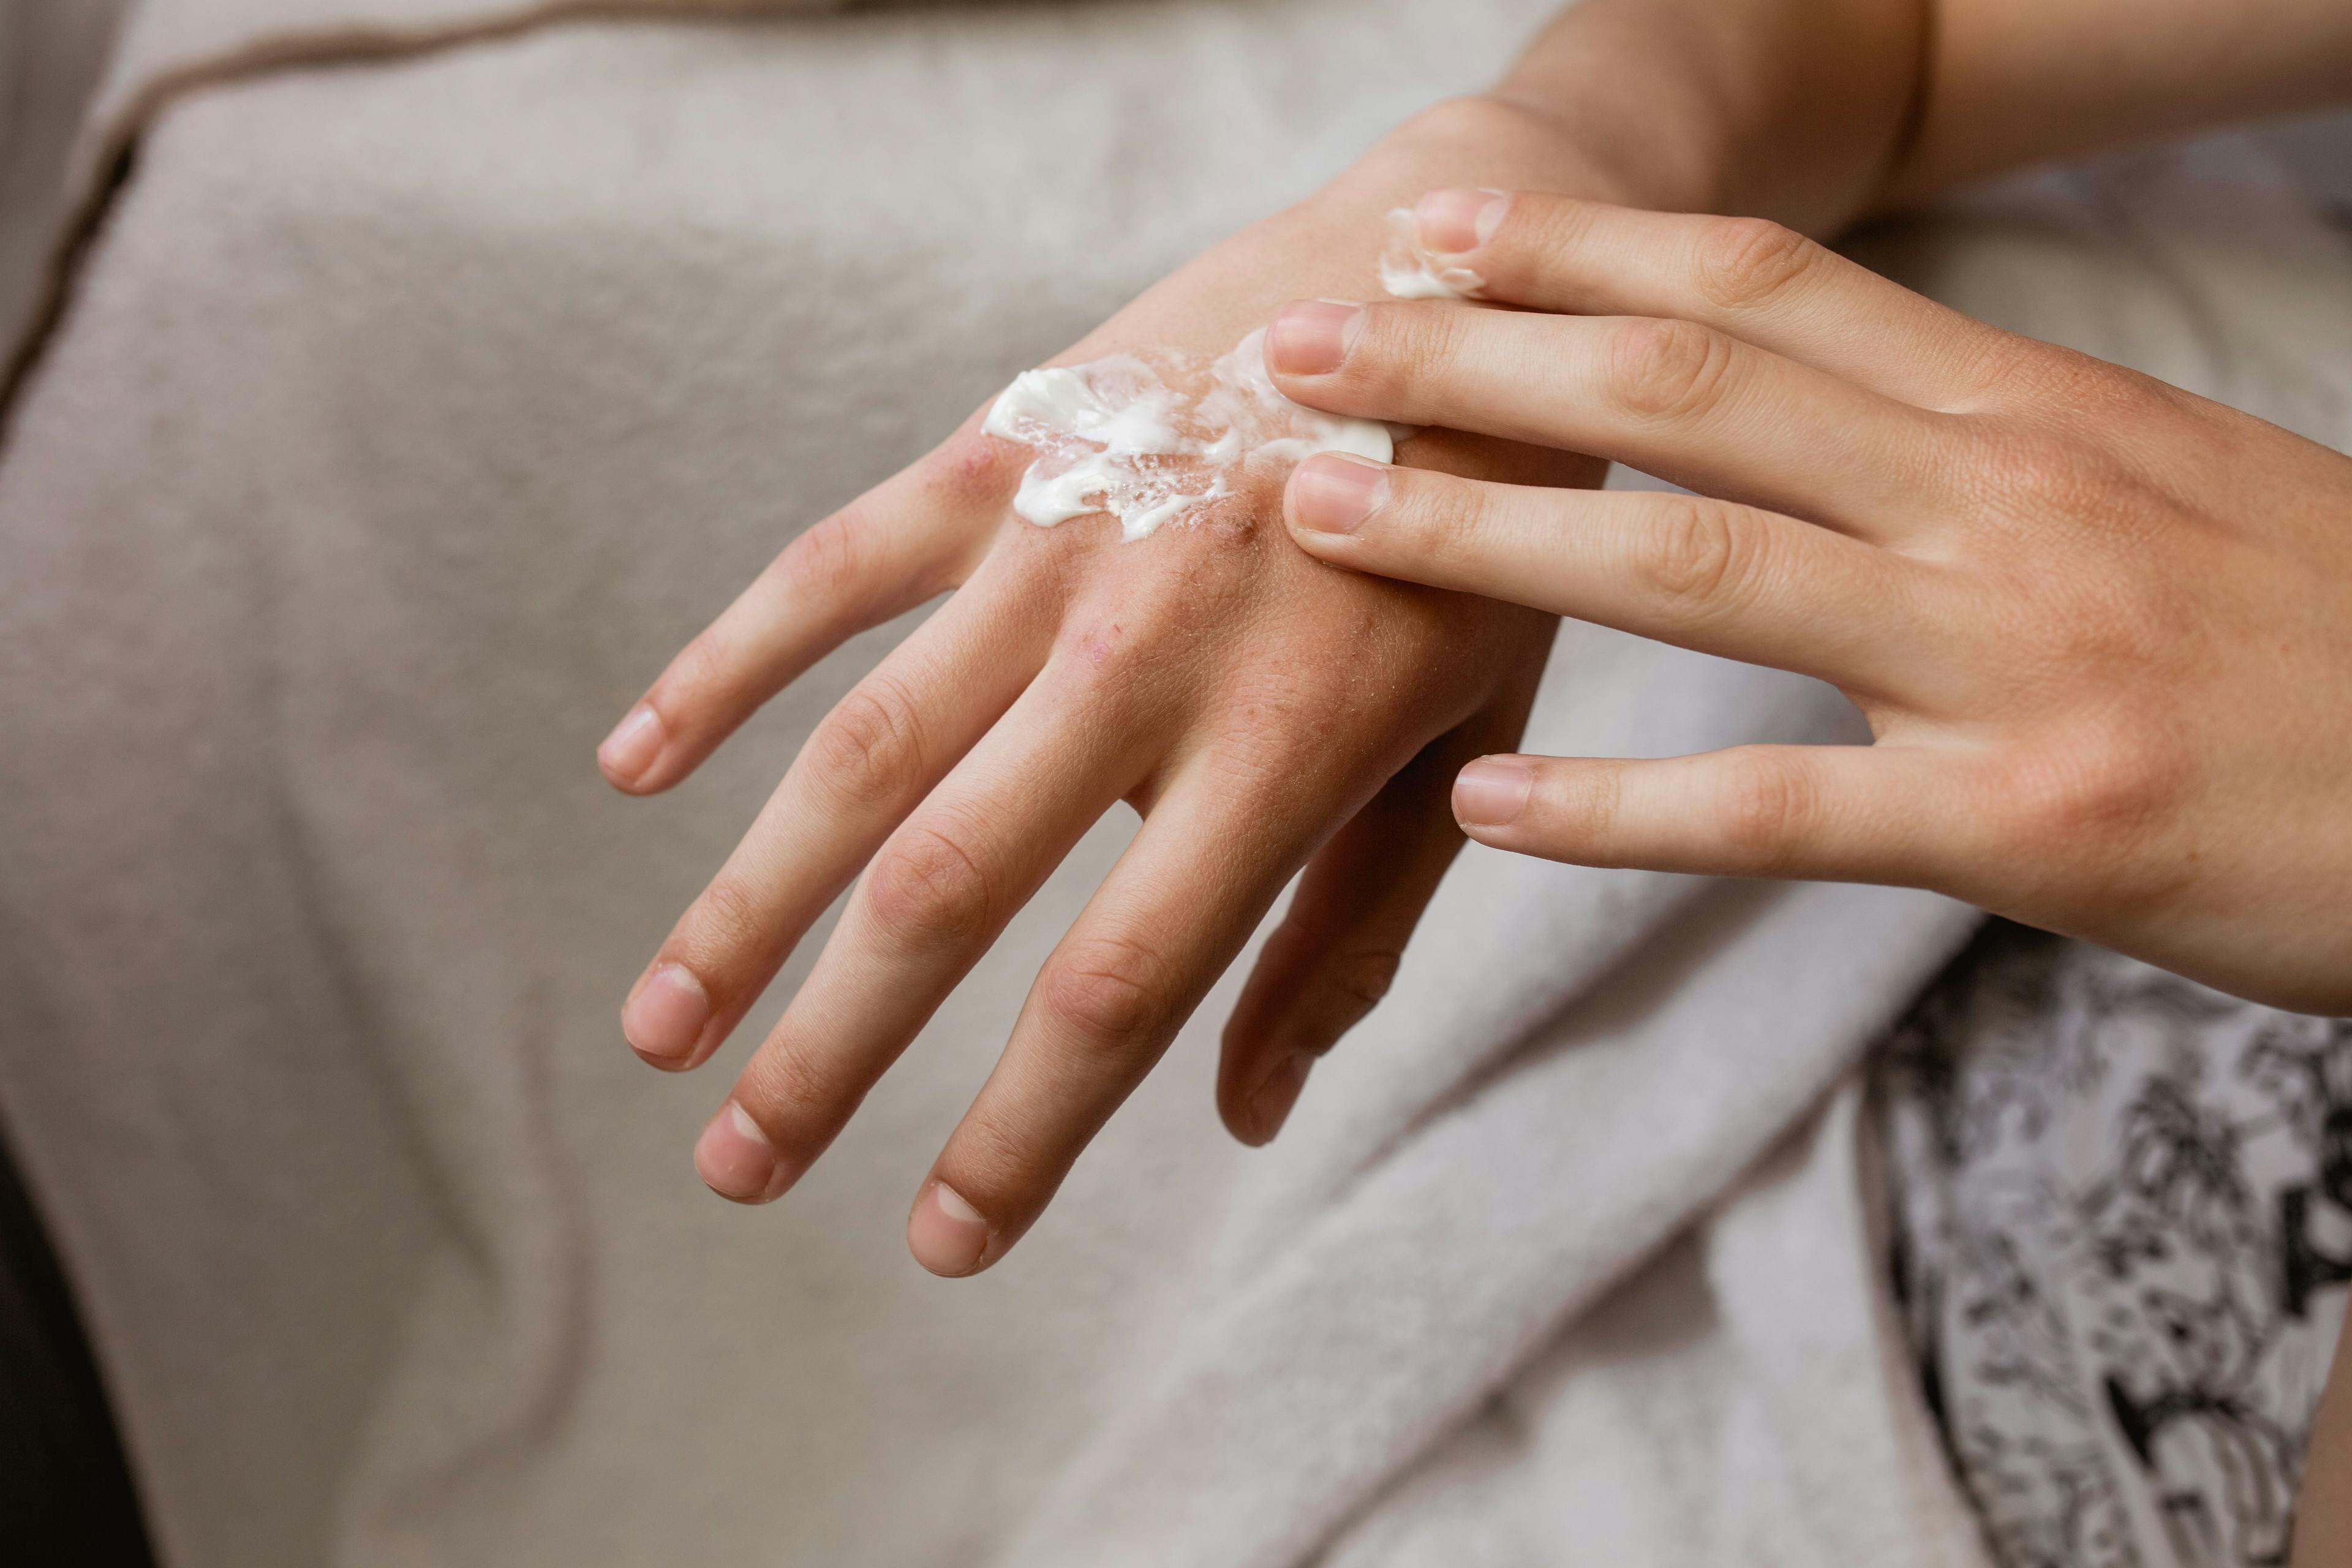 Delgocitinib Reduced Itch, Pain in Patients With Hand Eczema